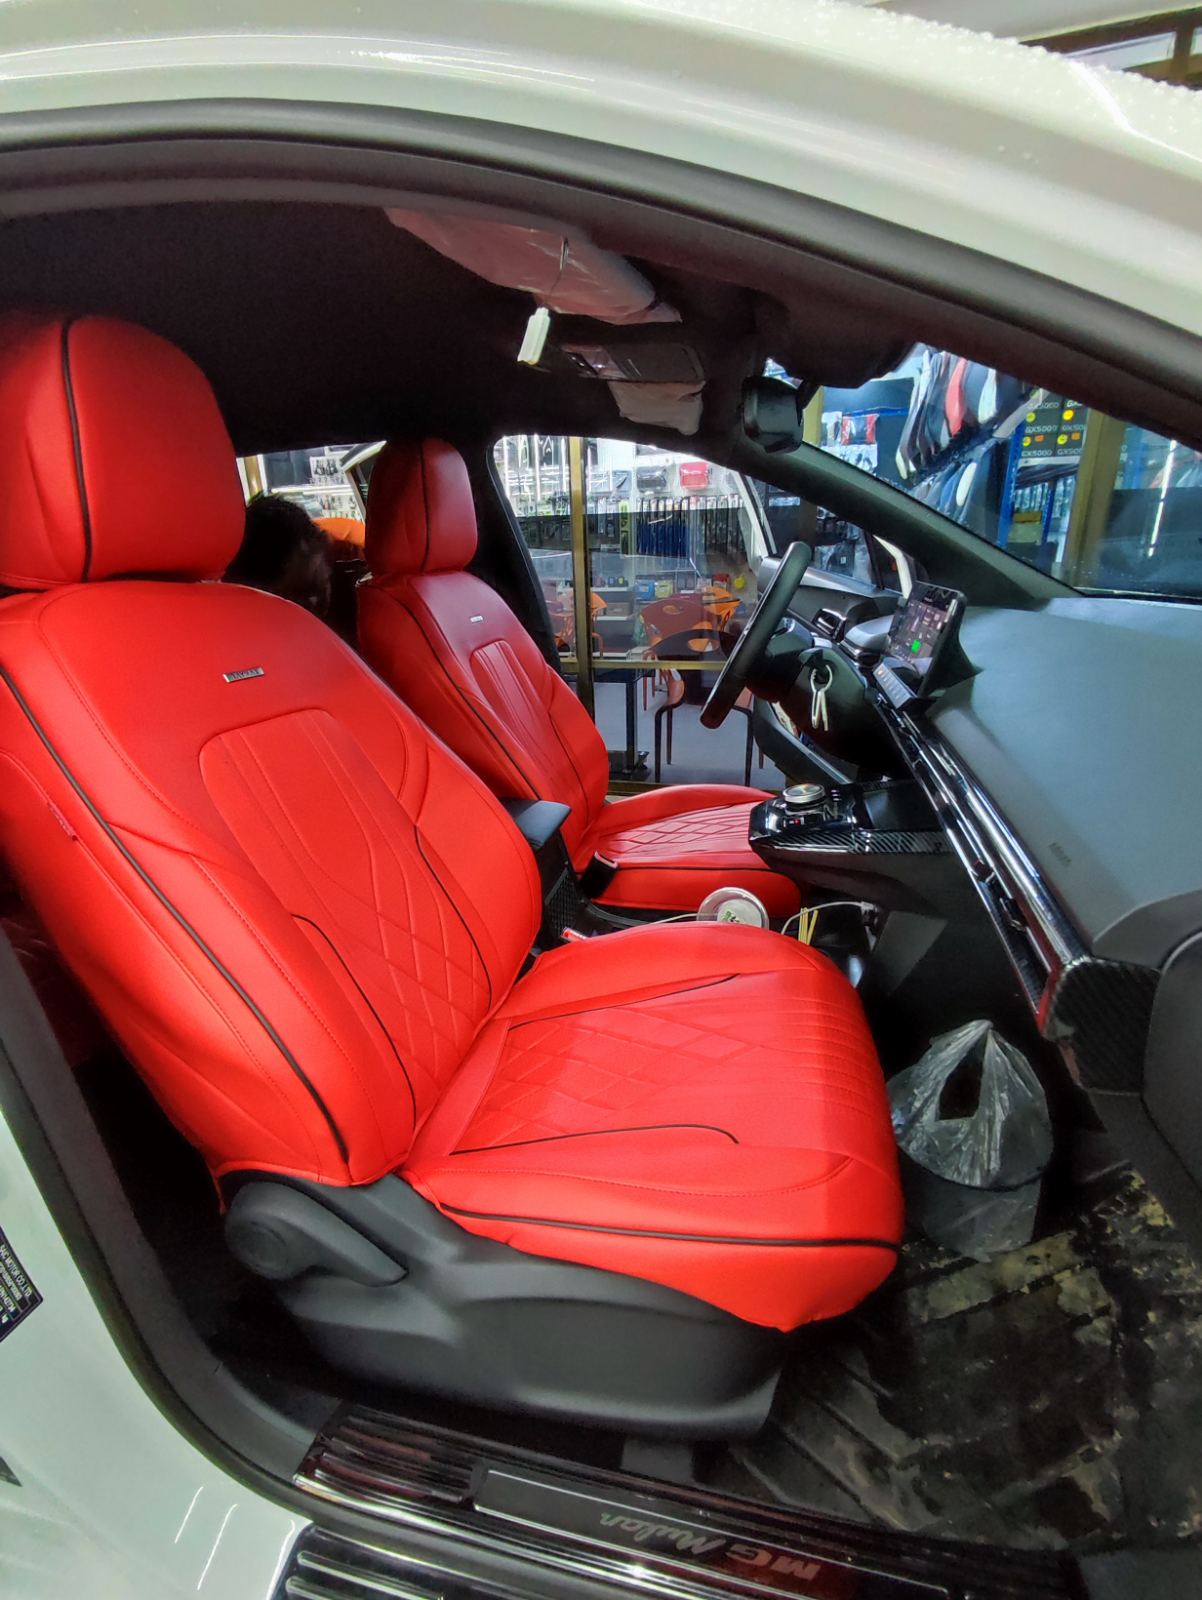 RAYMAX LUXURY SEAT COVER (H- 2022CX- 07)(1)SET_(RED)